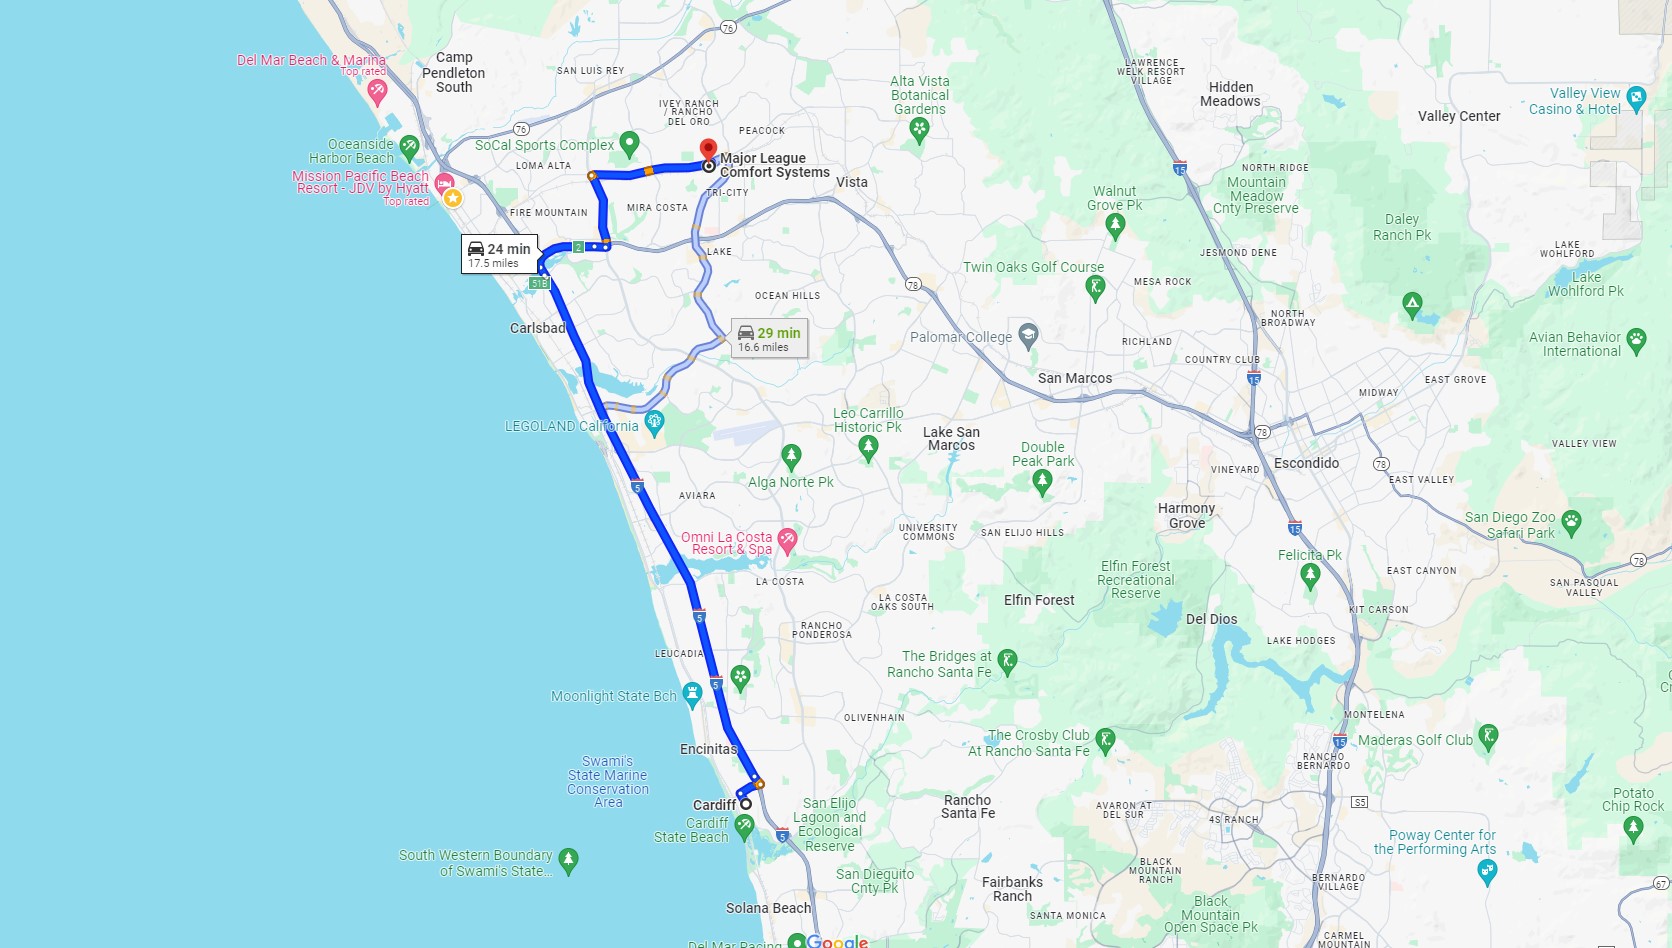 Directions from Cardiff CA to Major League Comfort Systems Heating and Air